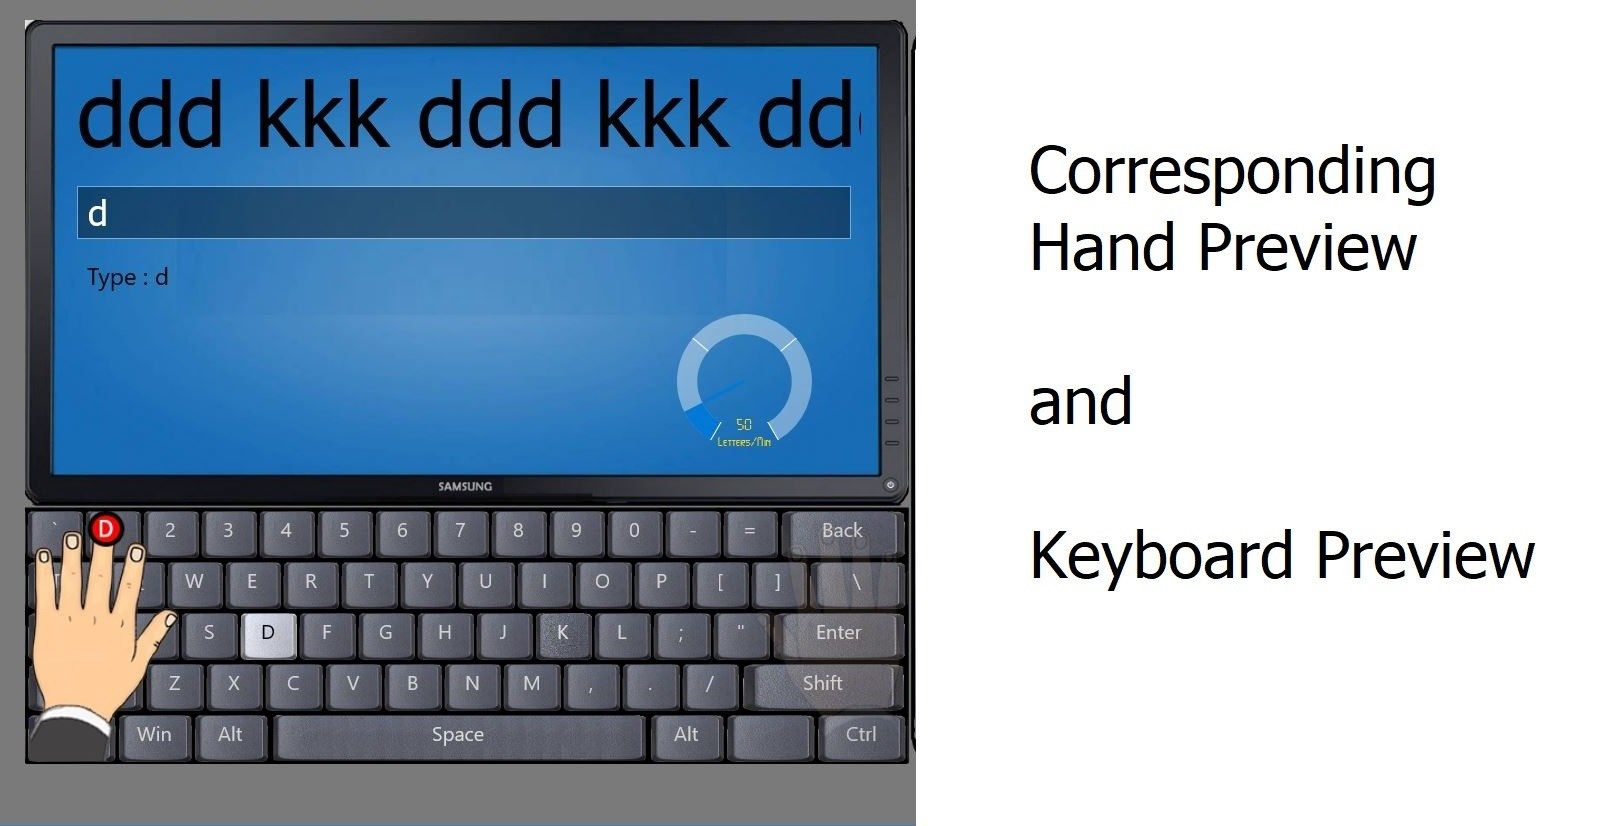 Learn Typing in Computer Keyboard